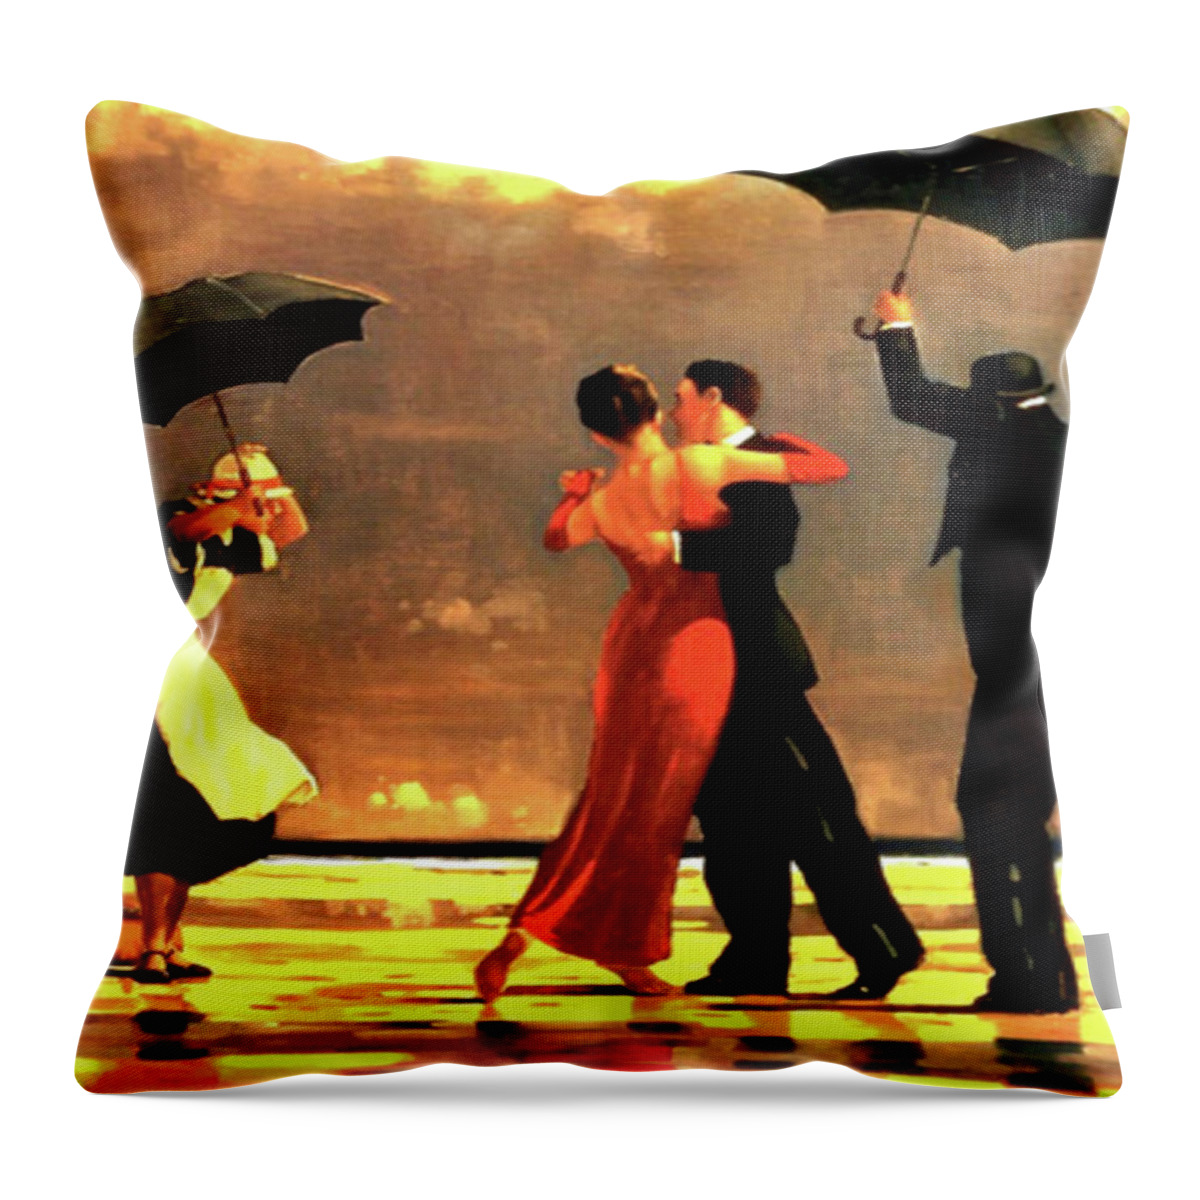 Jack Vettriano Throw Pillow featuring the painting The Singing Butler by Jack Vettriano